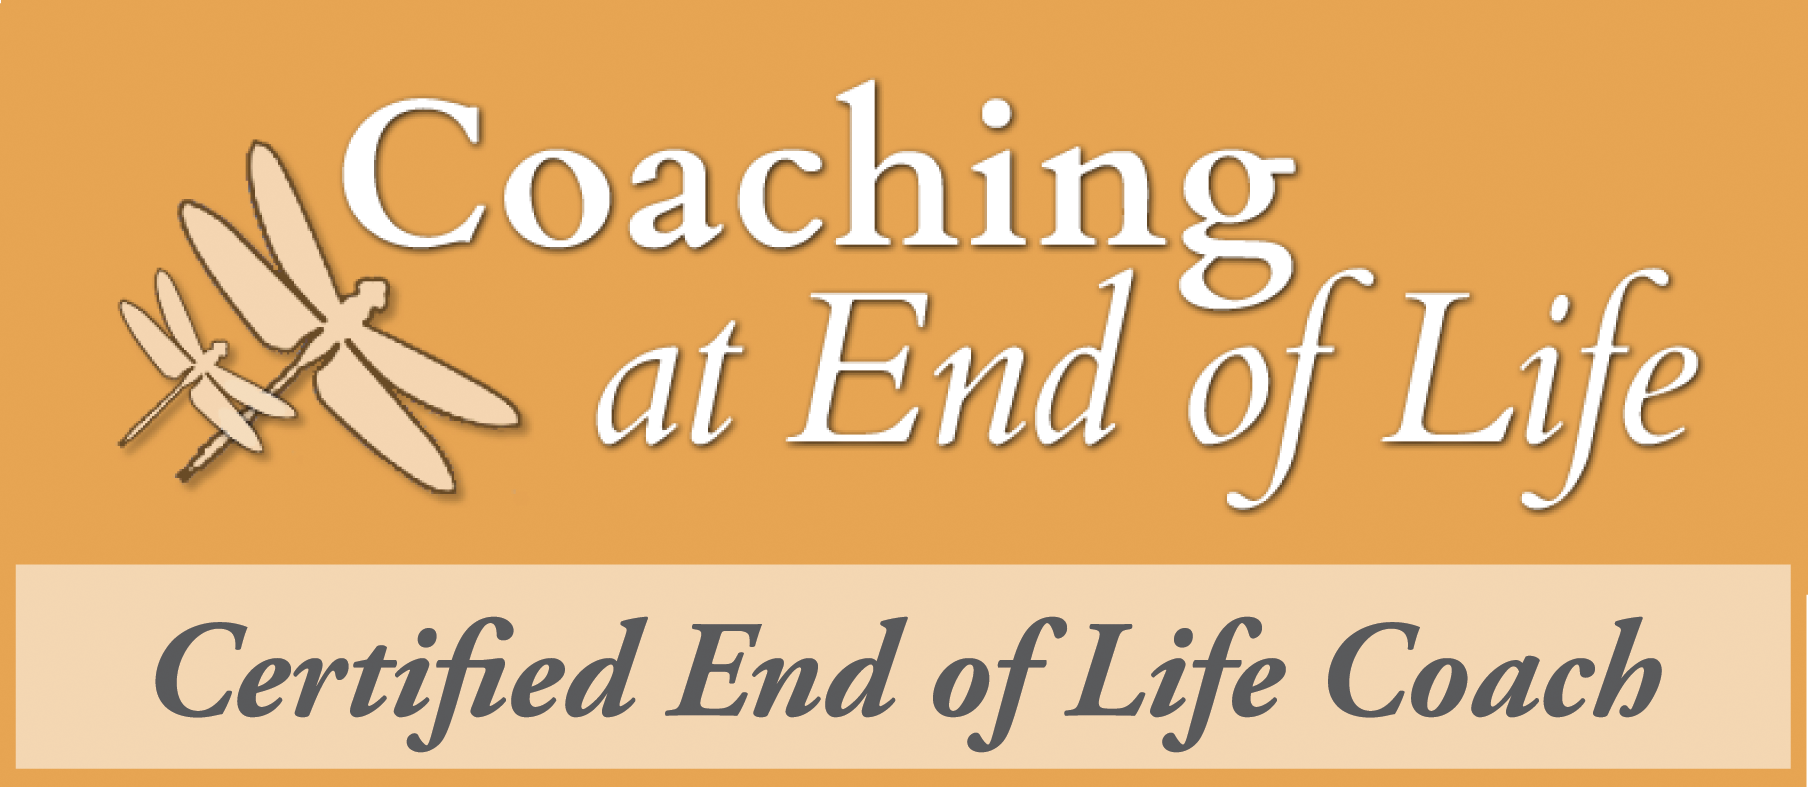 certified-end-of-life-coach-logo